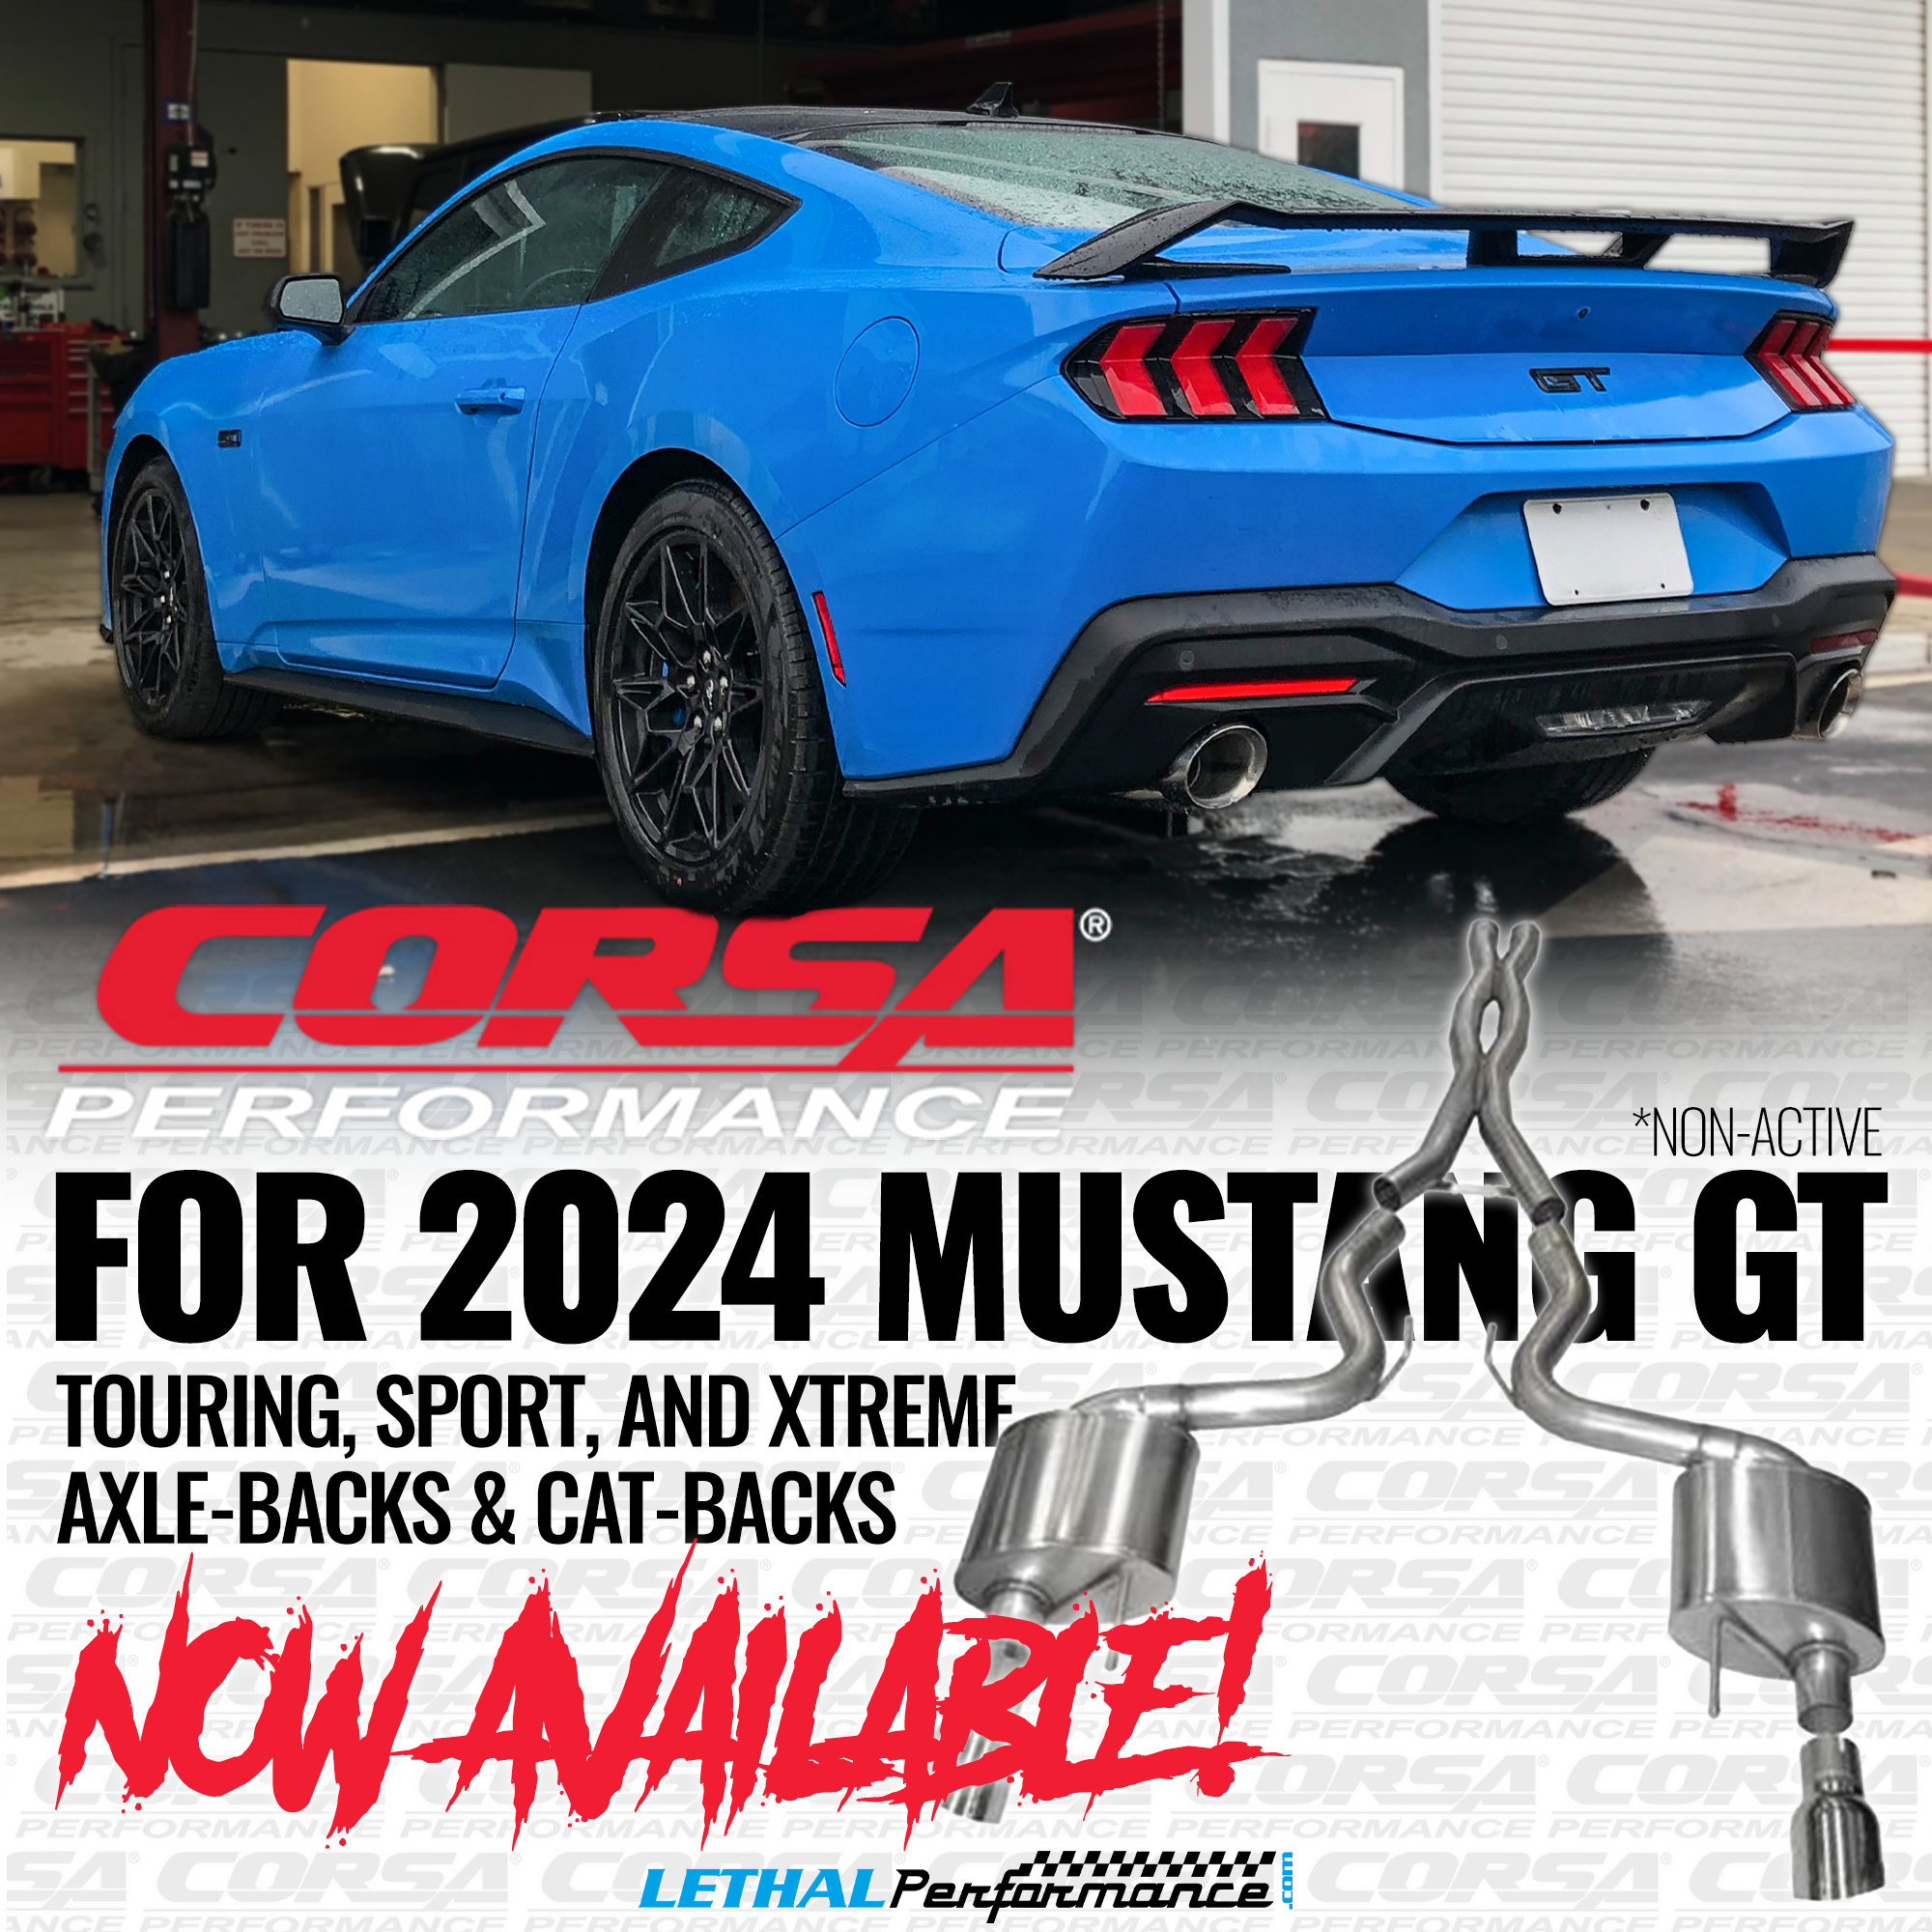 S650 Mustang Corsa Performance Catbacks NOW AVAILABLE for S650 here at Lethal Performance!! corsa 2024 